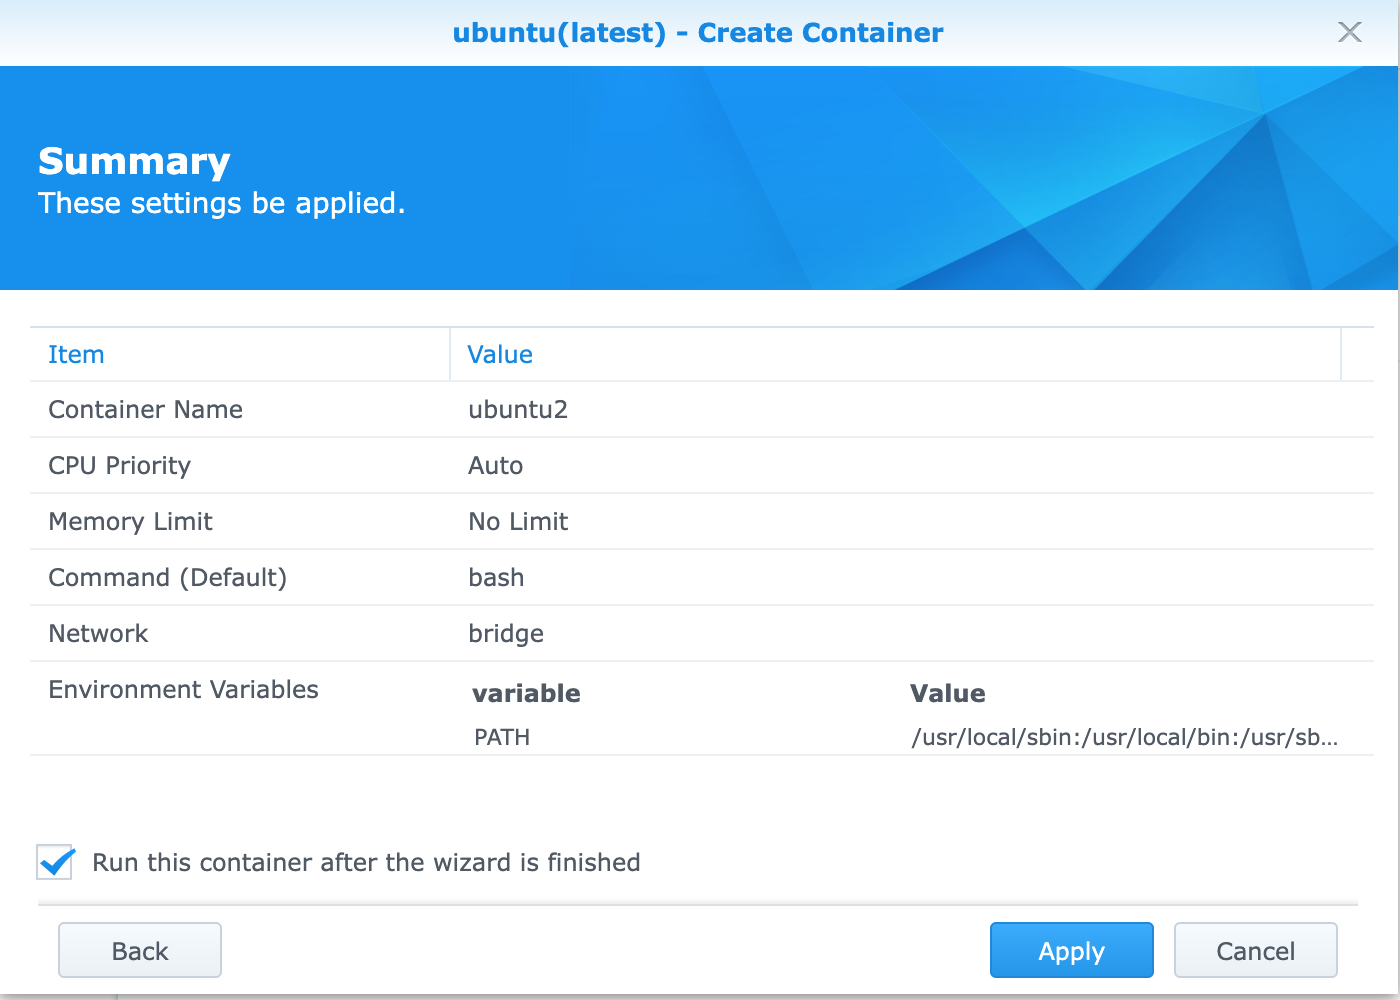 Click on Apply to finalize the container creation